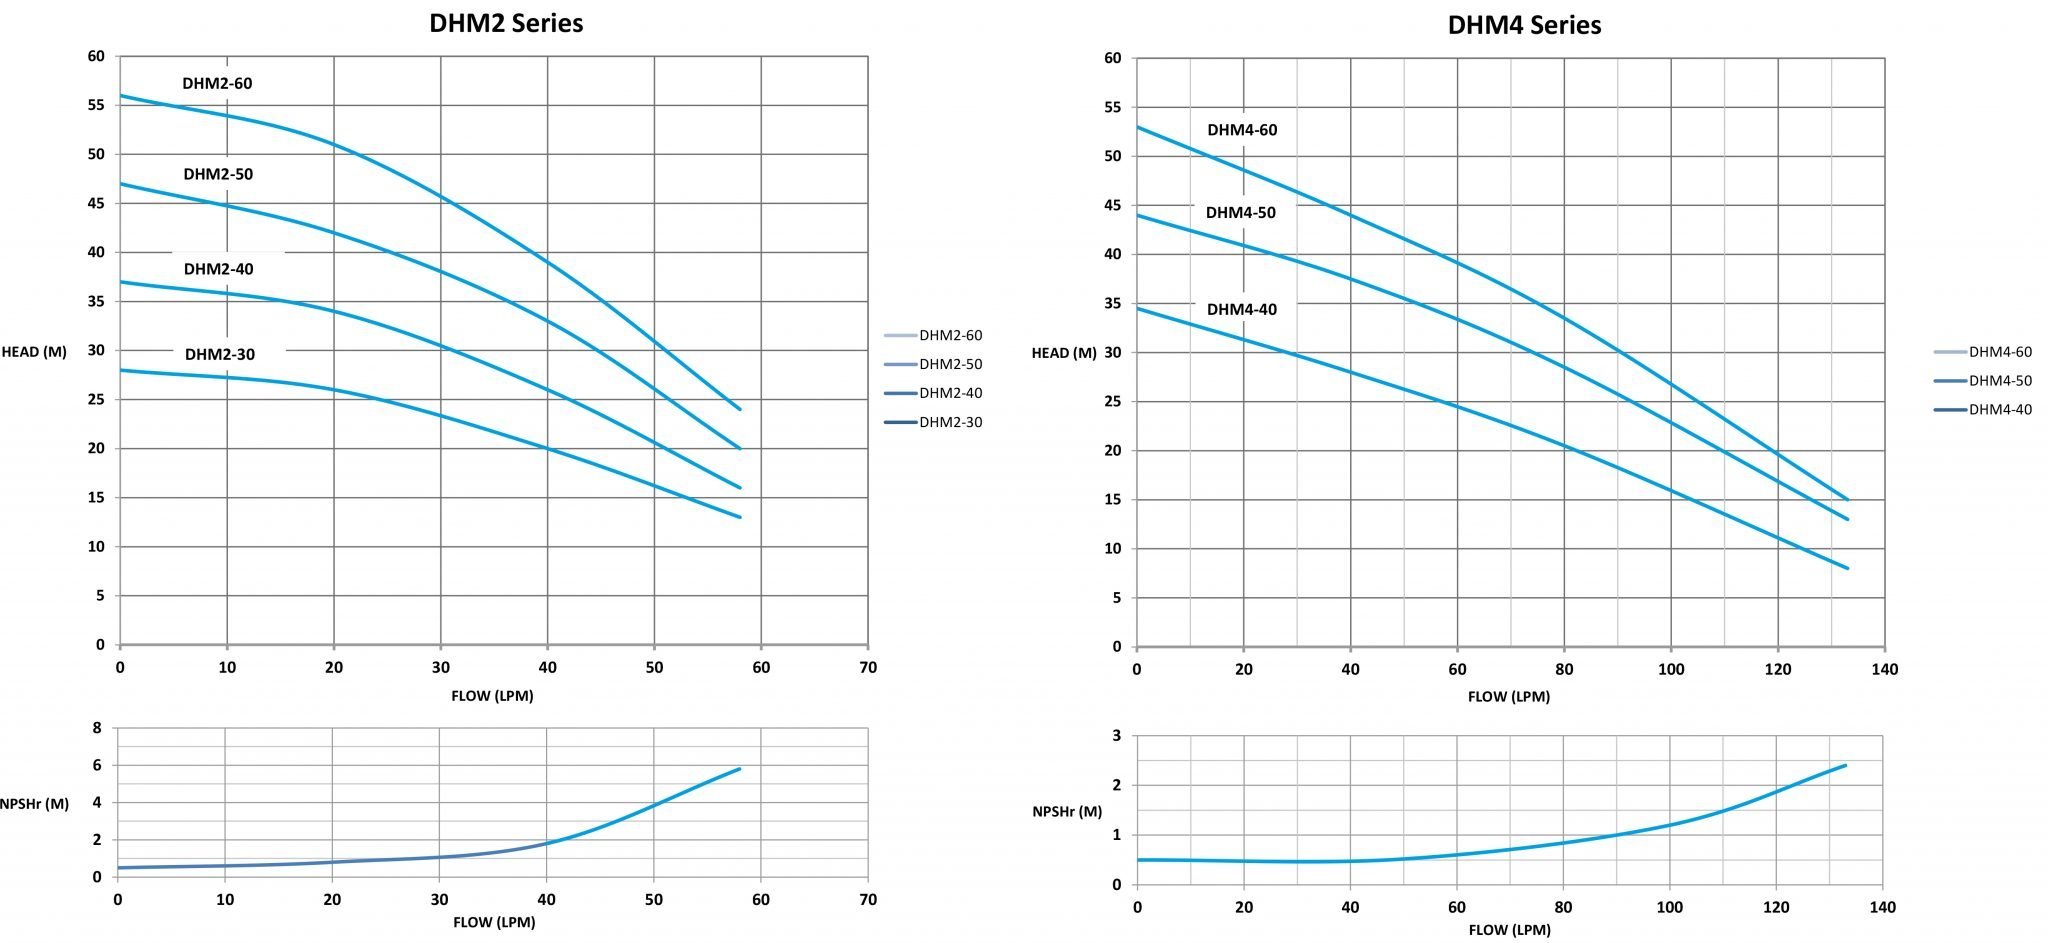 dhm4-series-performance-graph